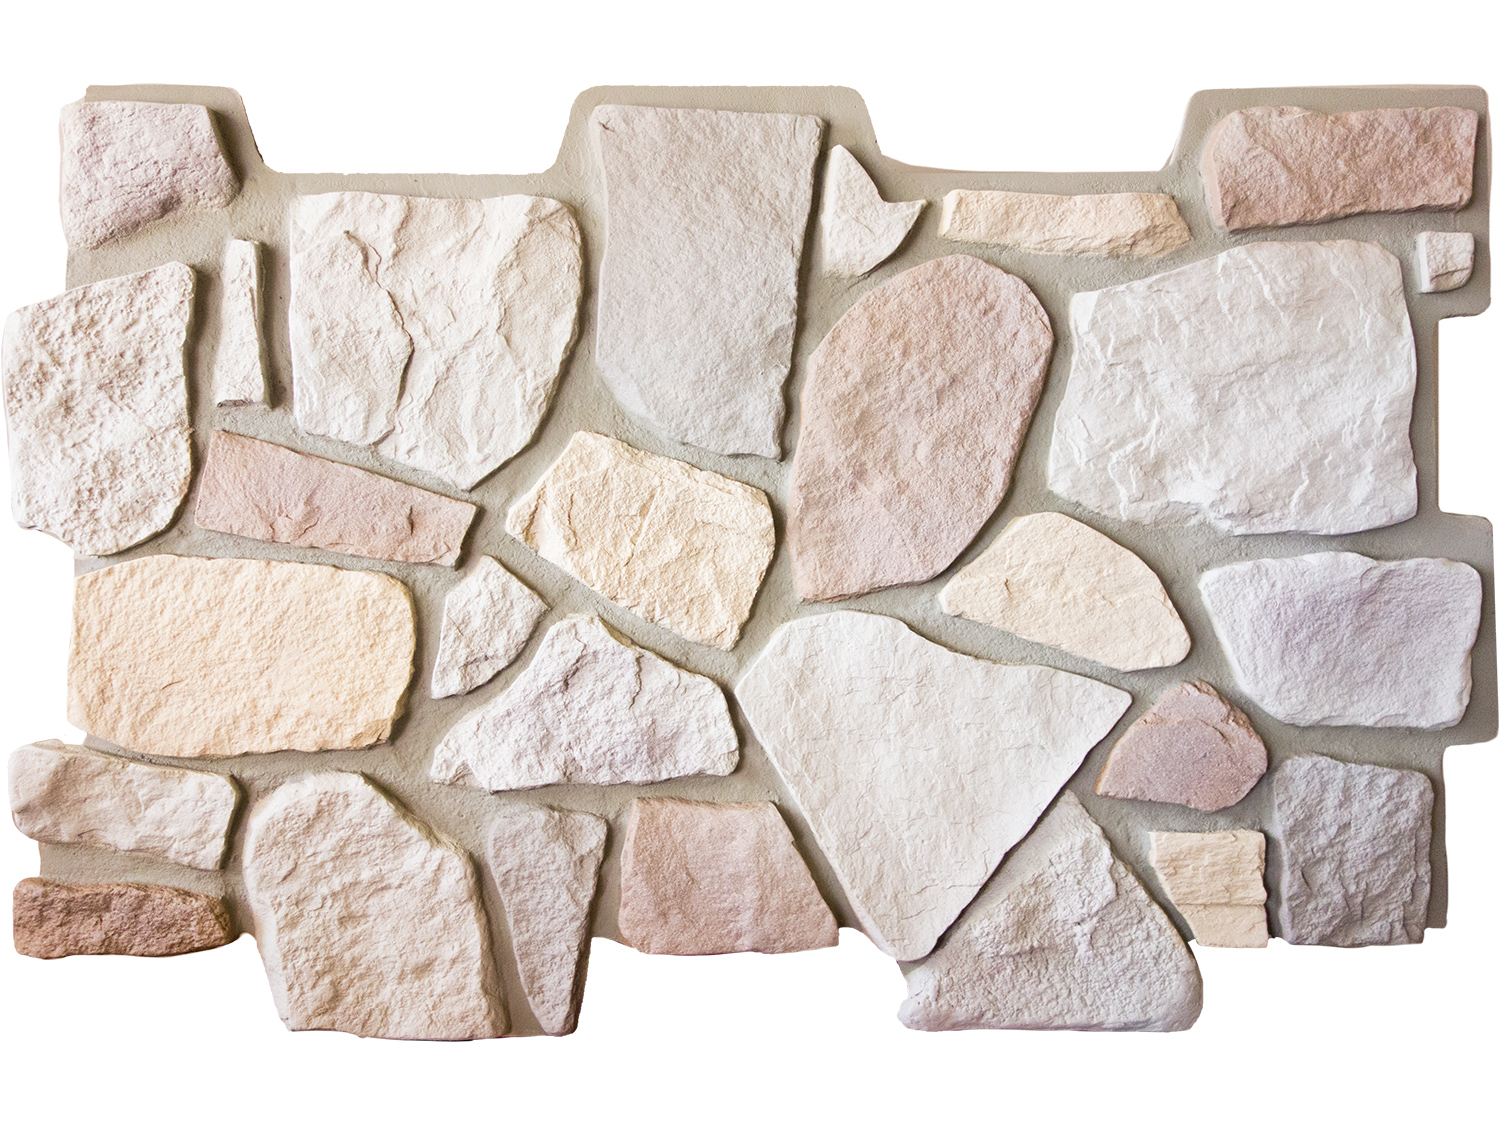 How do you install stone wall panels?